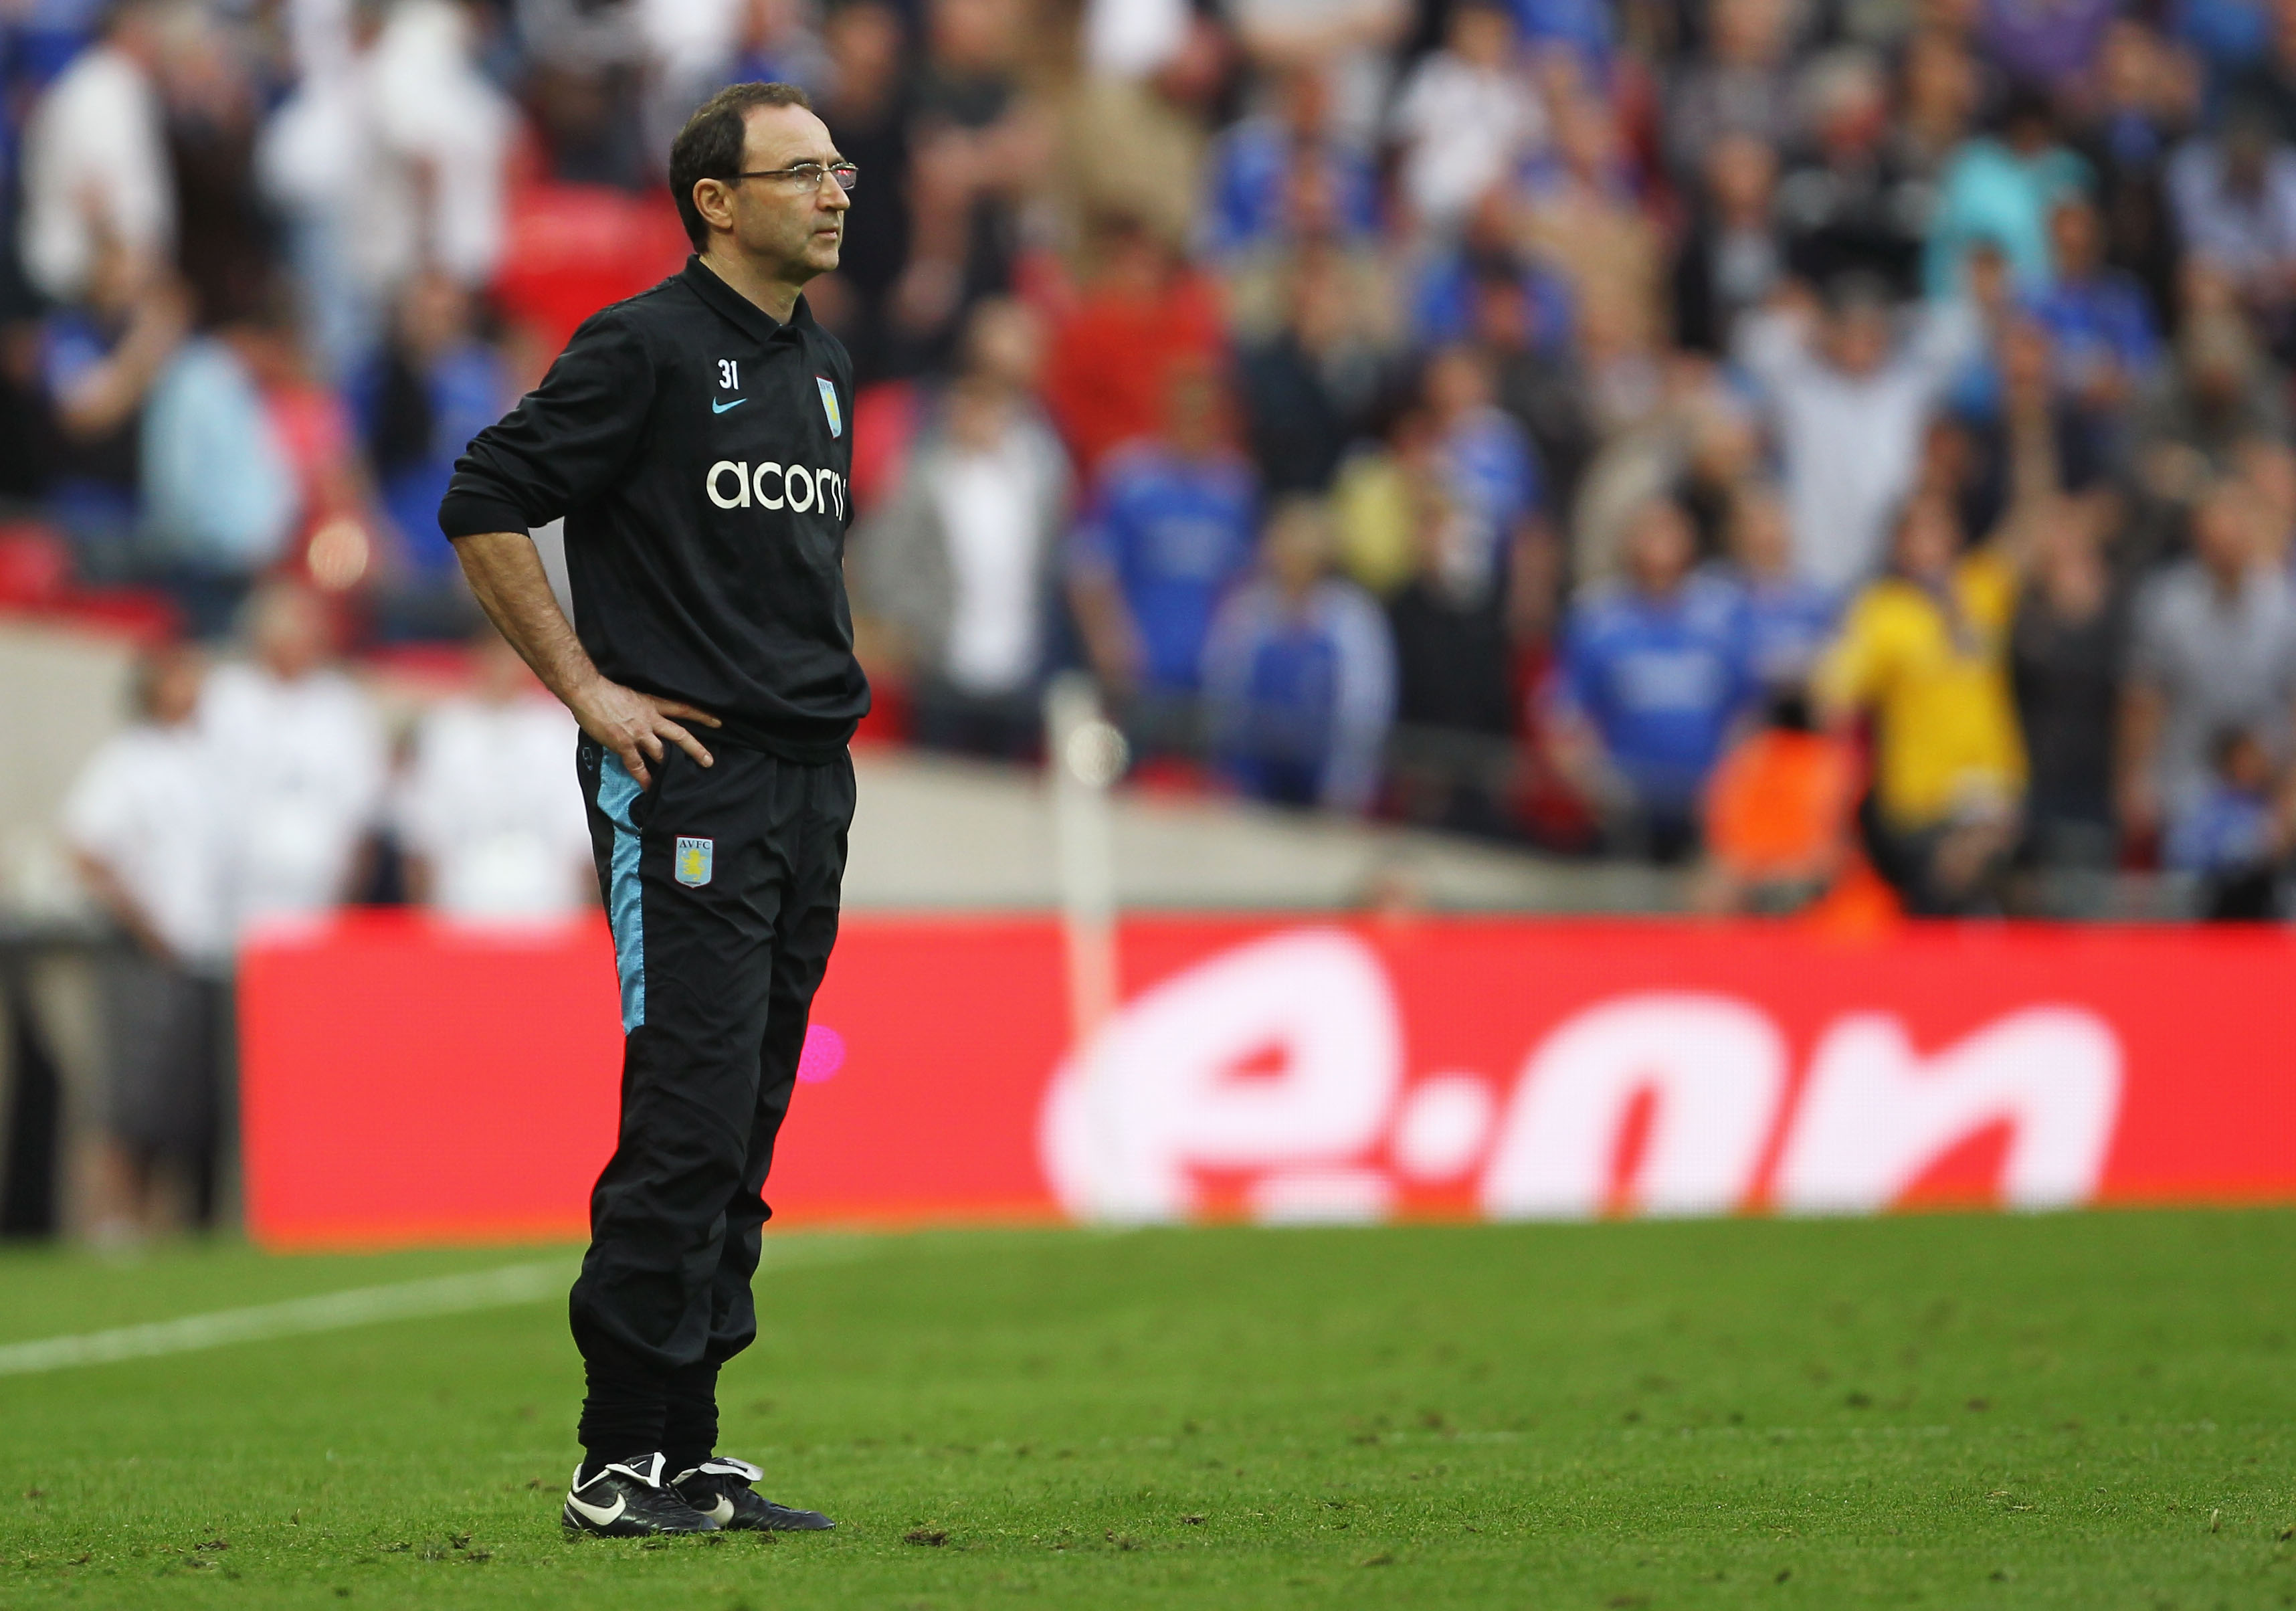 LONDON, ENGLAND - APRIL 10:  Aston Villa manager Martin O'Neill looks dejected as he watches his team lose in the FA Cup sponsored by E.ON Semi Final match between Aston Villa and Chelsea at Wembley Stadium on April 10, 2010 in London, England.  (Photo by